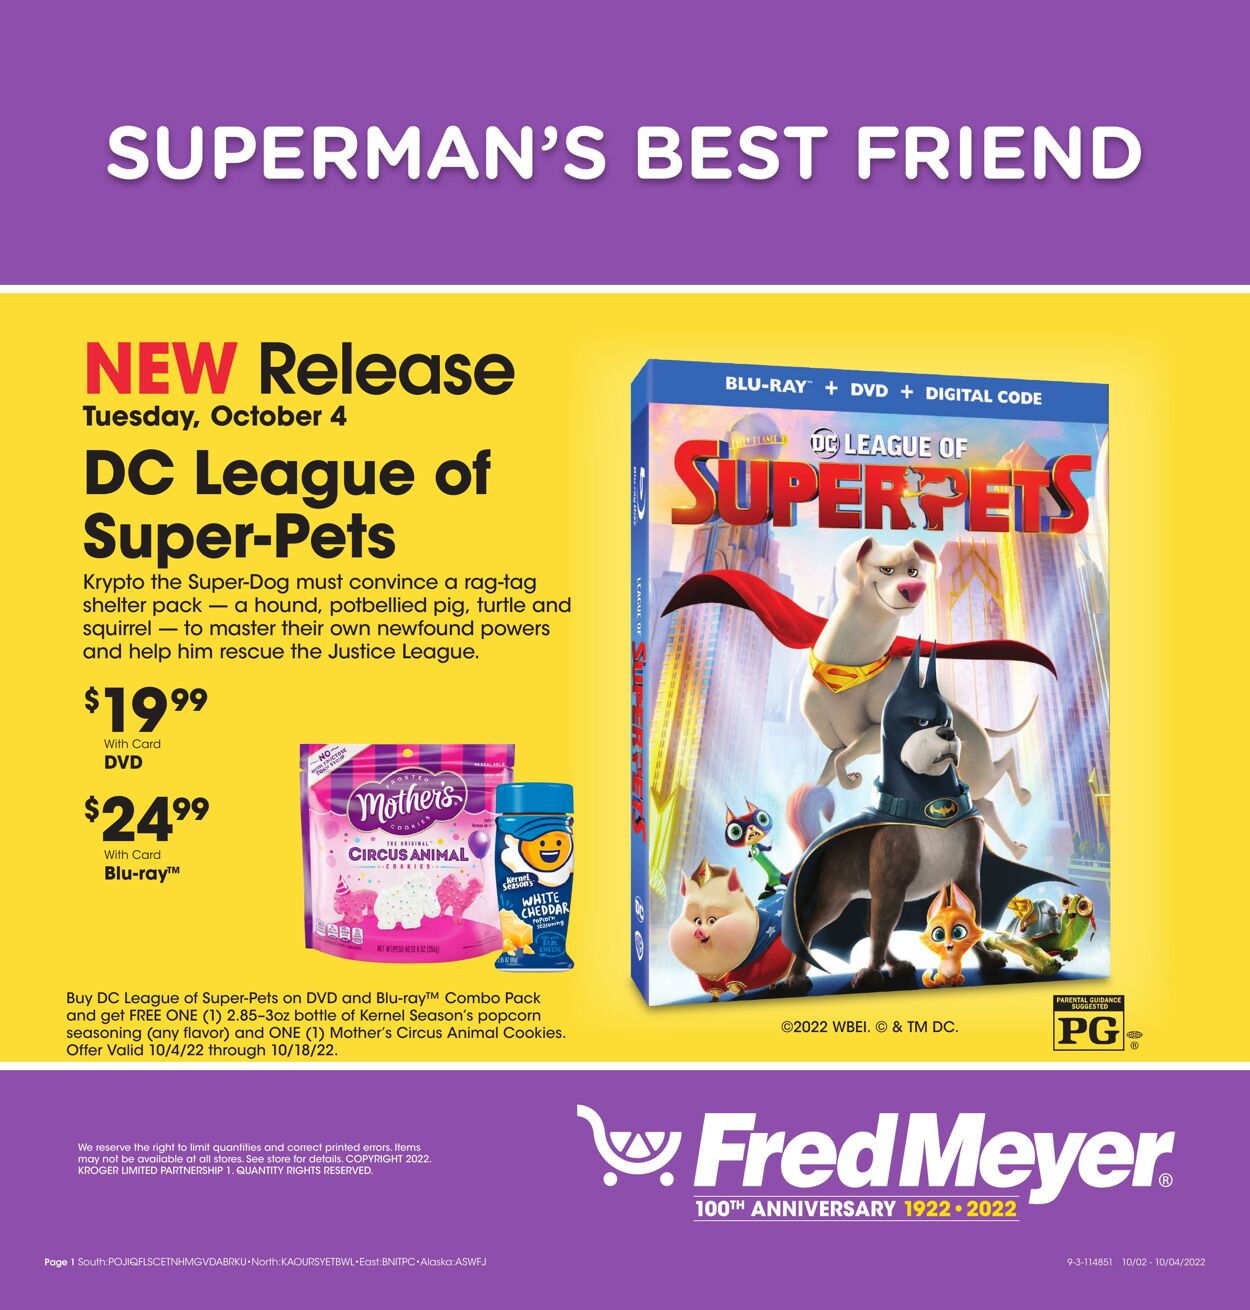 Fred Meyer Promotional weekly ads